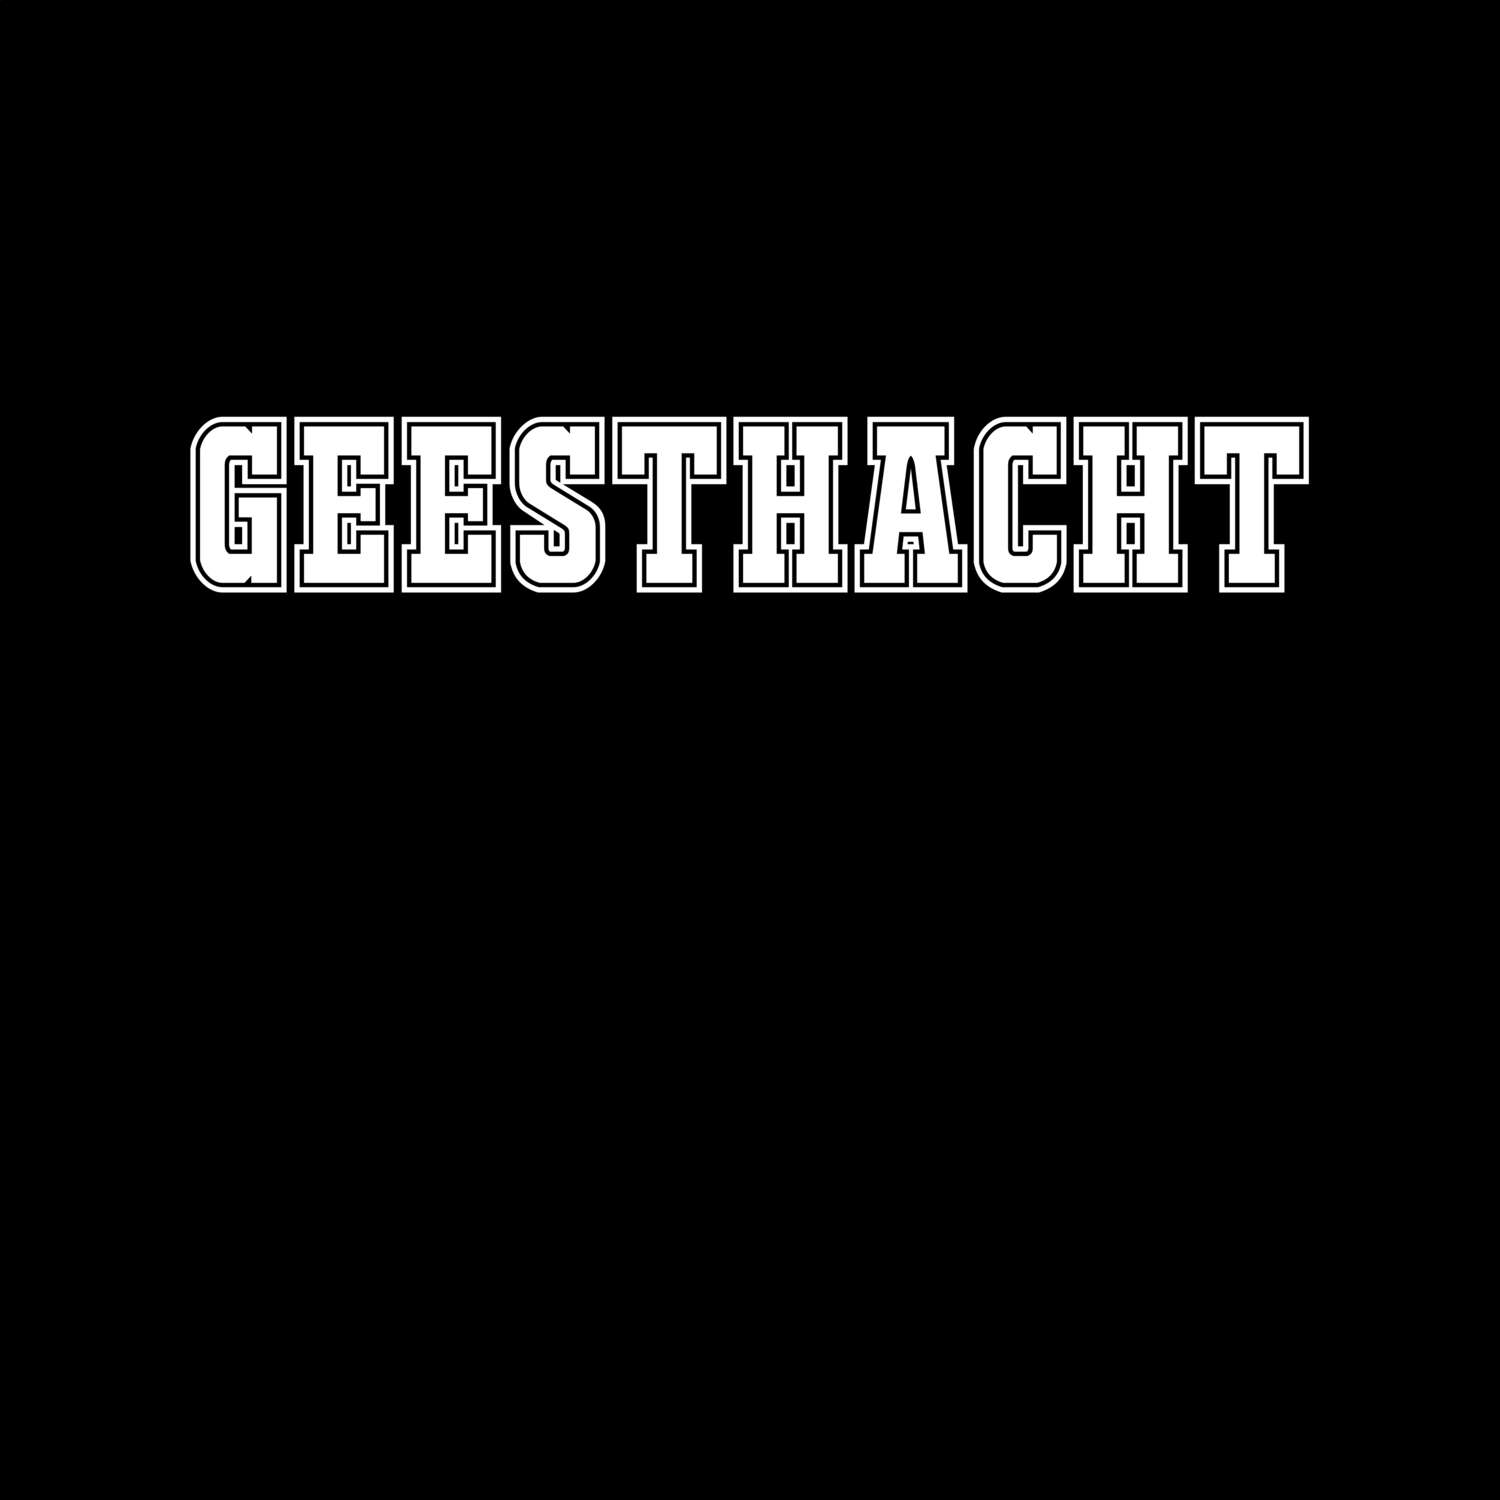 Geesthacht T-Shirt »Classic«